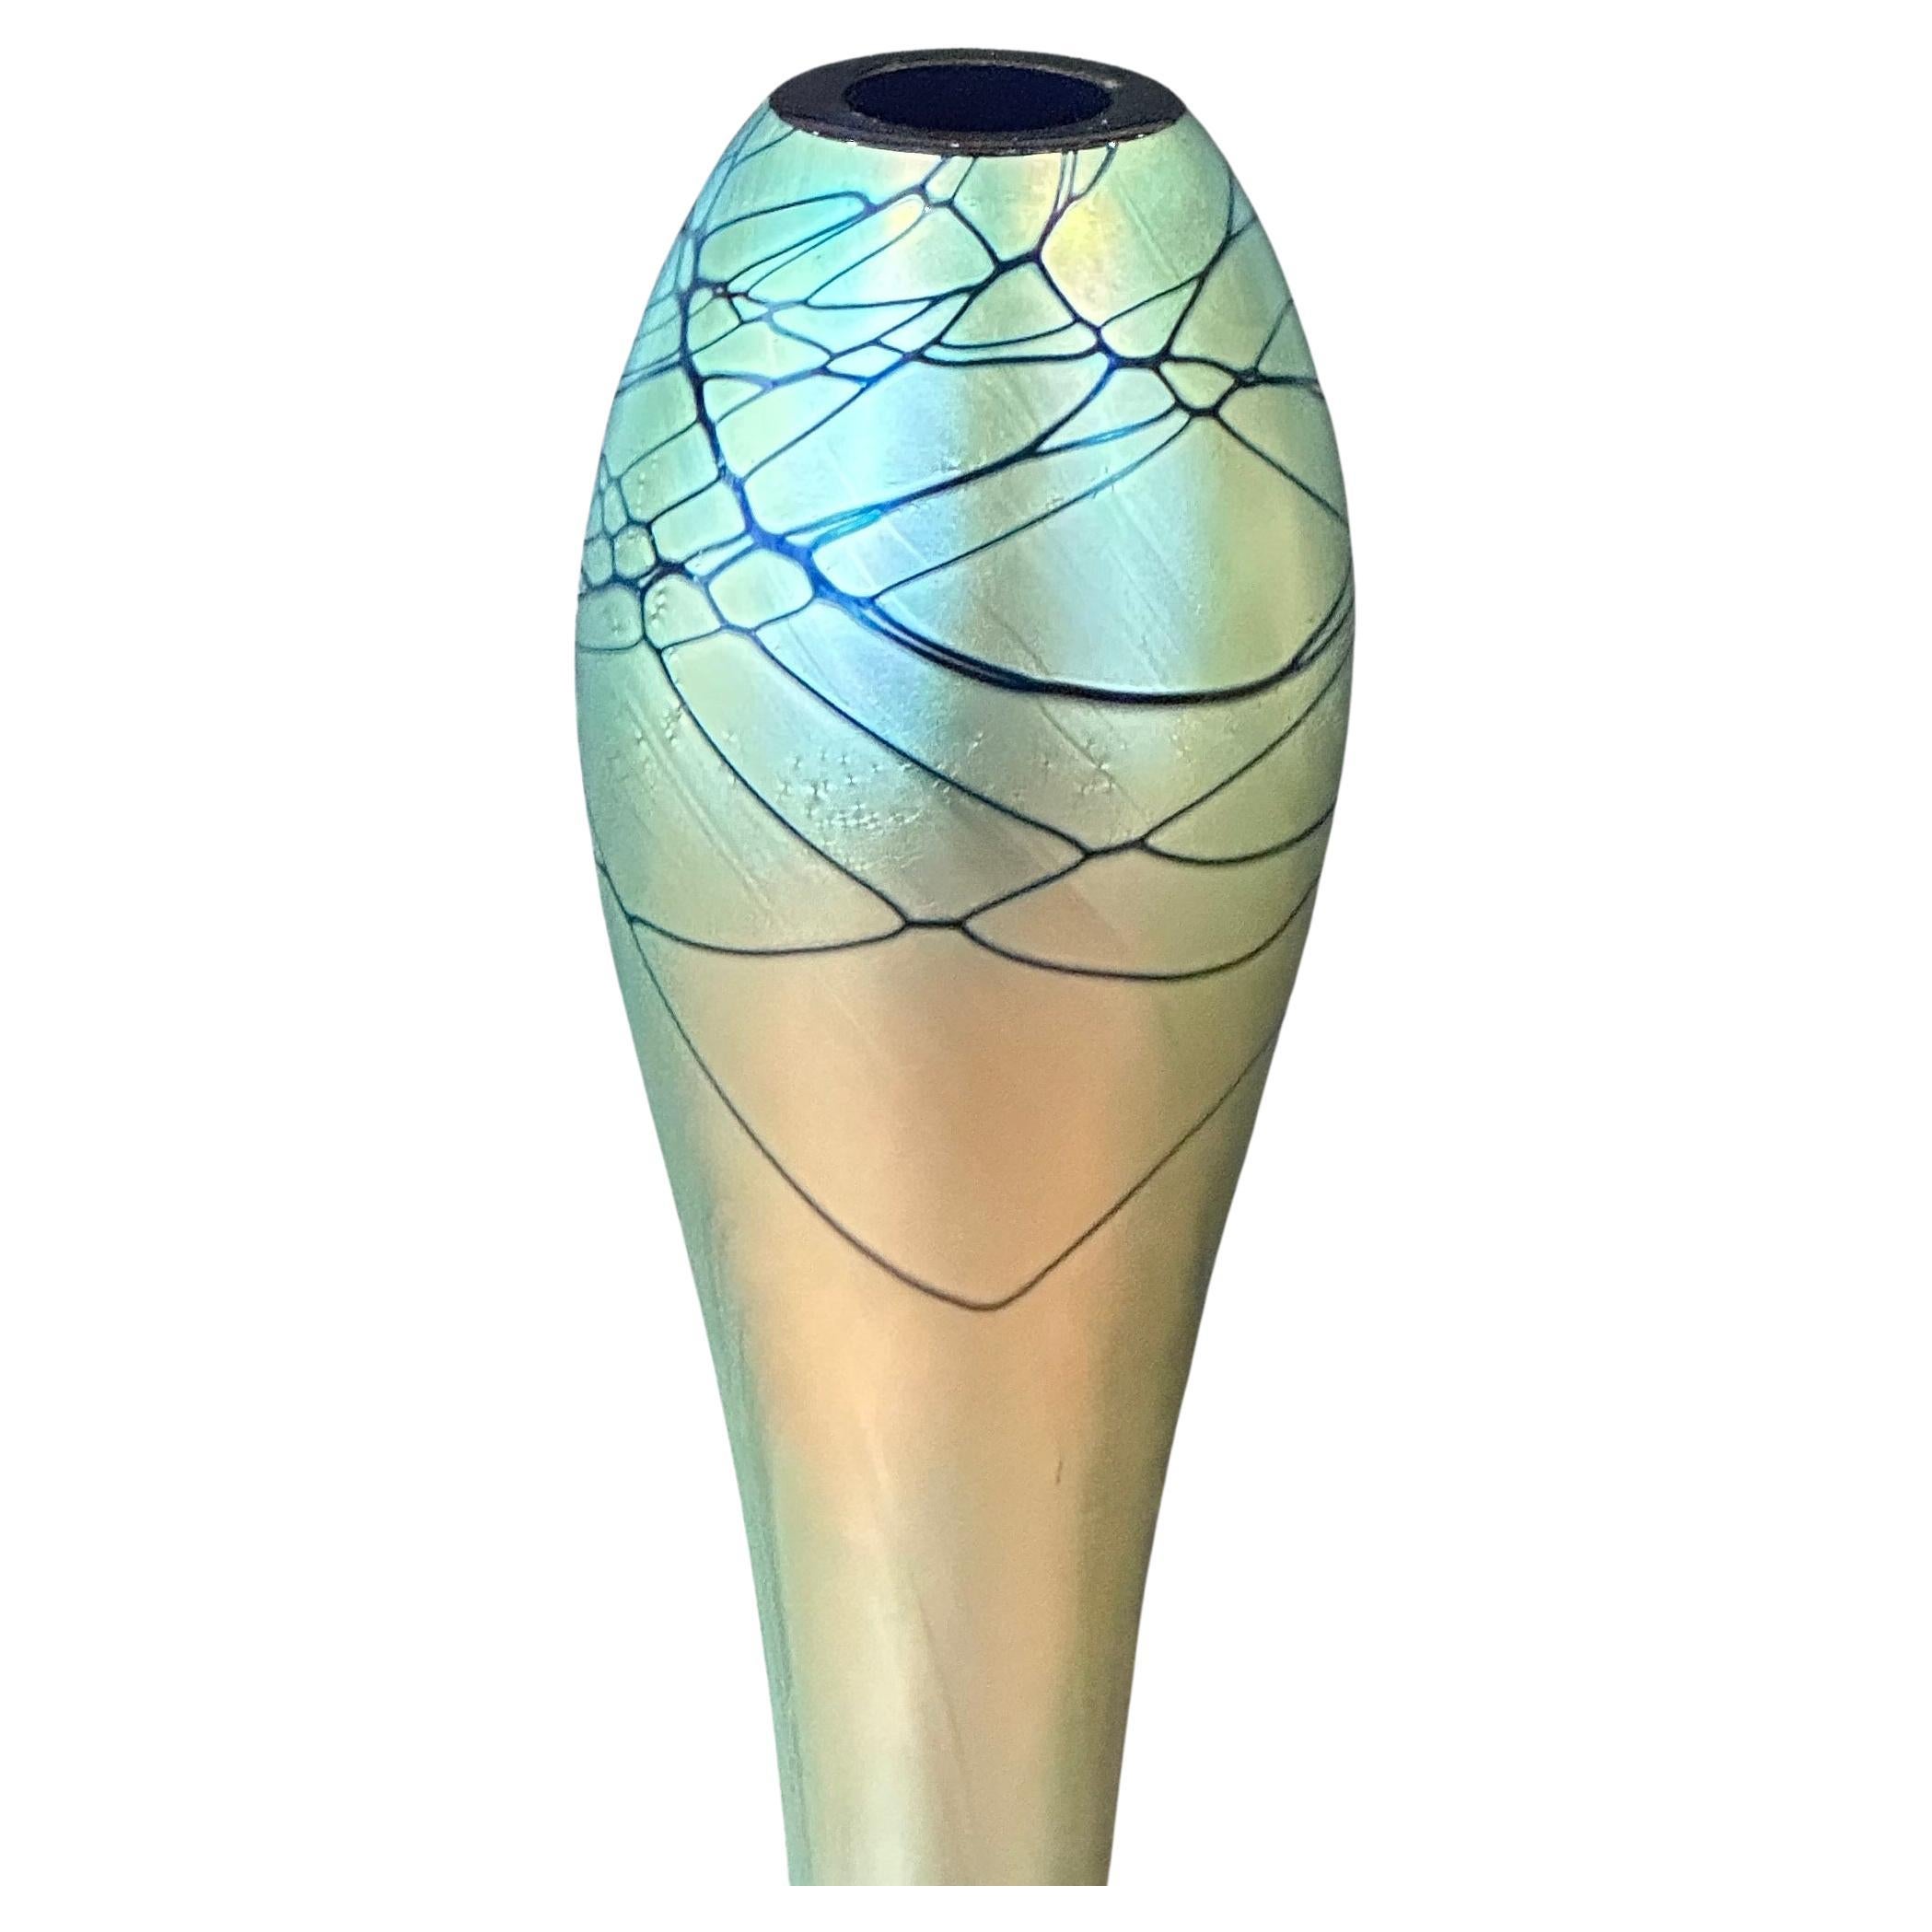 Gorgeous tall iridescent art glass bud vase by Steven Maslach, circa 1989.  This vase is in very good vintage condition with no chips or cracks and measures 3.375